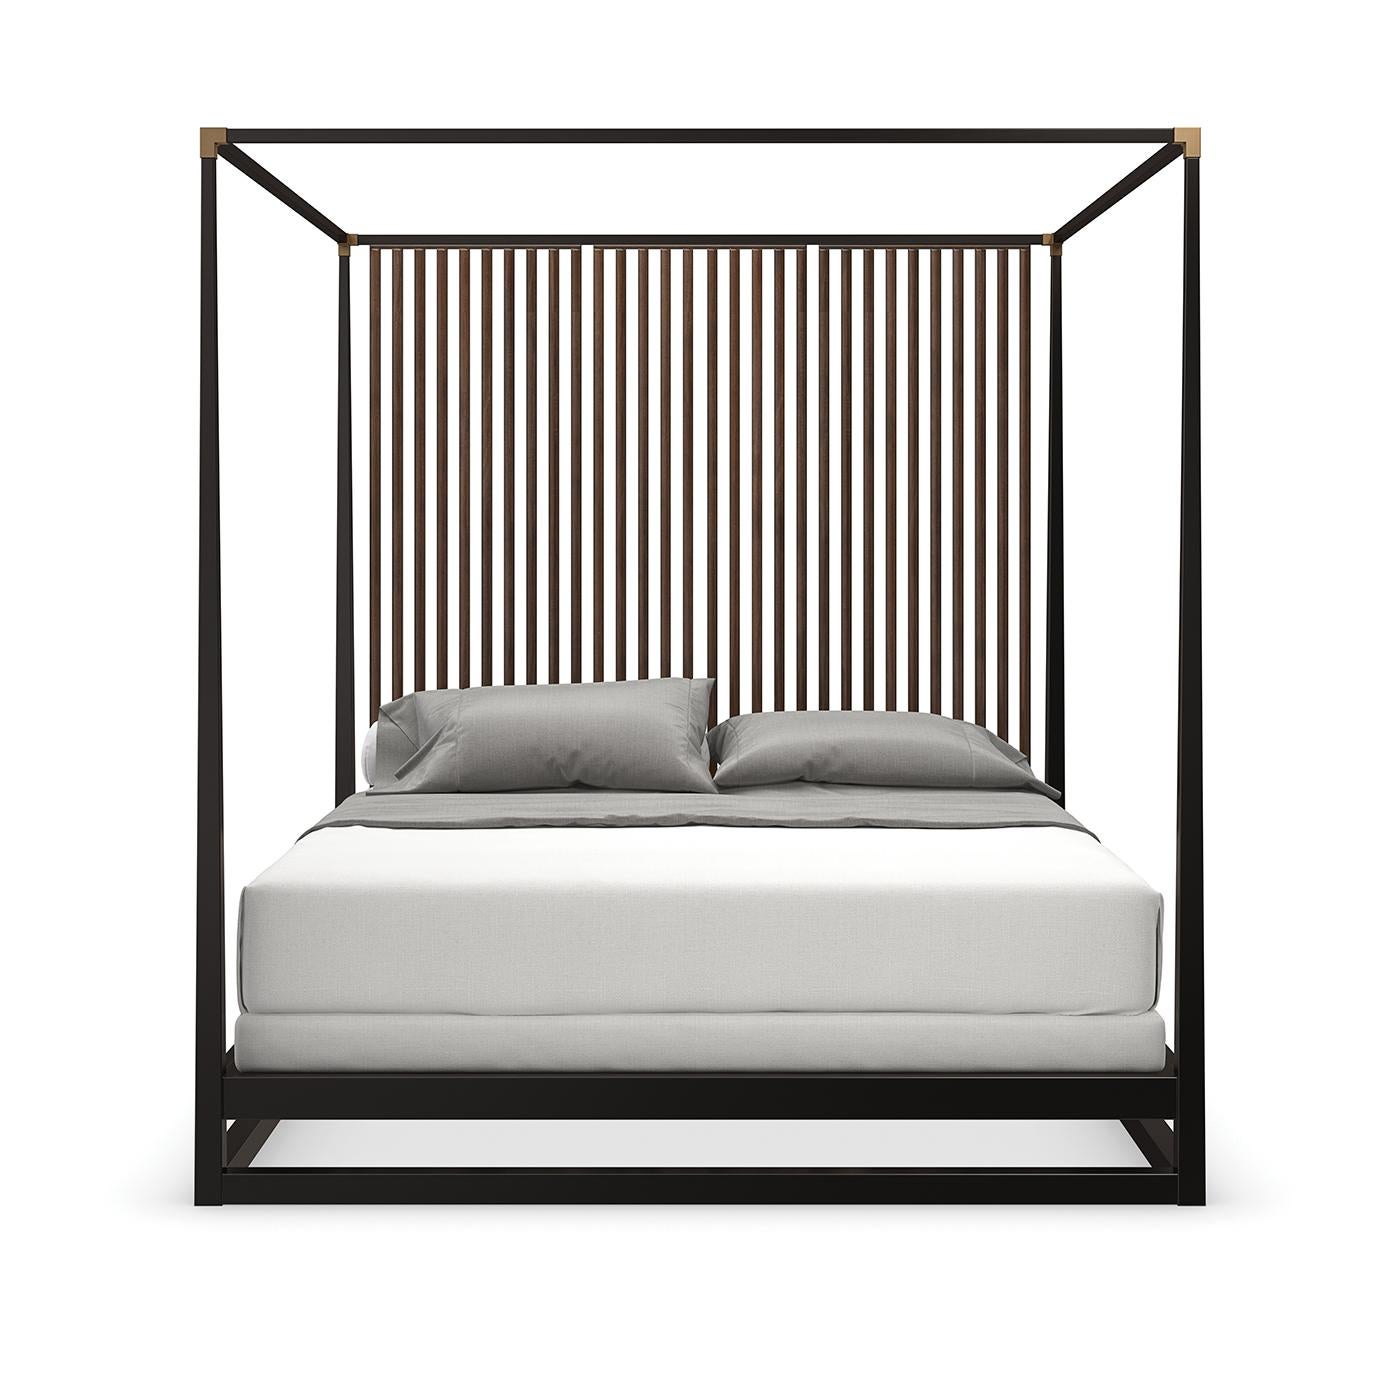 A Mid-Century Modern style canopy bed with a dramatic vertical slat back design. It has an architecturally inspired design that features Rich Walnut vertical slats, warmly contrasted by a dark chocolate canopy and posts accented with champagne gold